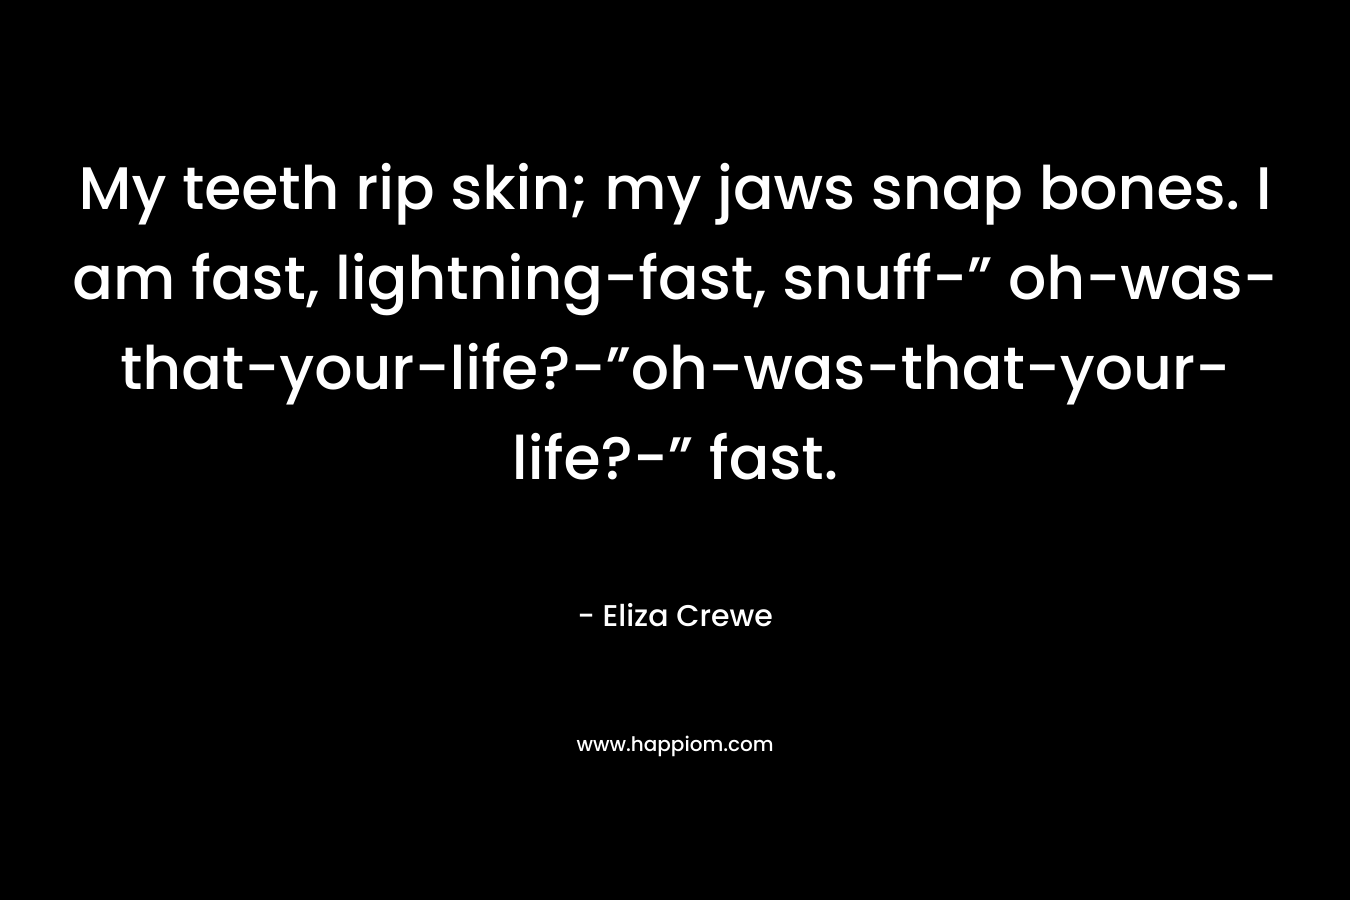 My teeth rip skin; my jaws snap bones. I am fast, lightning-fast, snuff-” oh-was-that-your-life?-”oh-was-that-your-life?-” fast. – Eliza Crewe